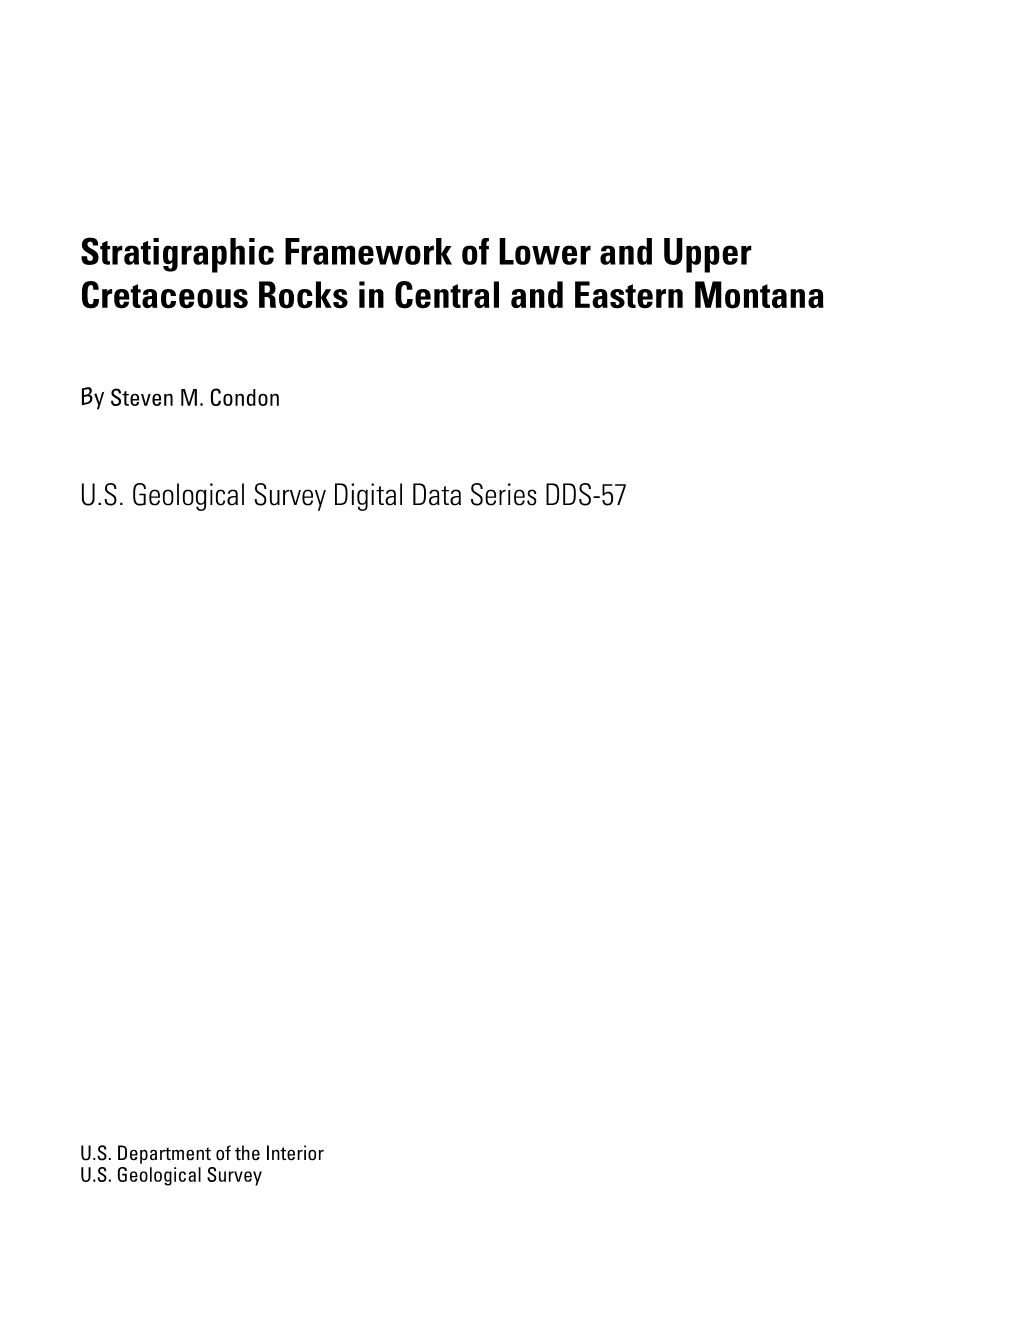 Stratigraphic Framework of Lower and Upper Cretaceous Rocks in Central and Eastern Montana